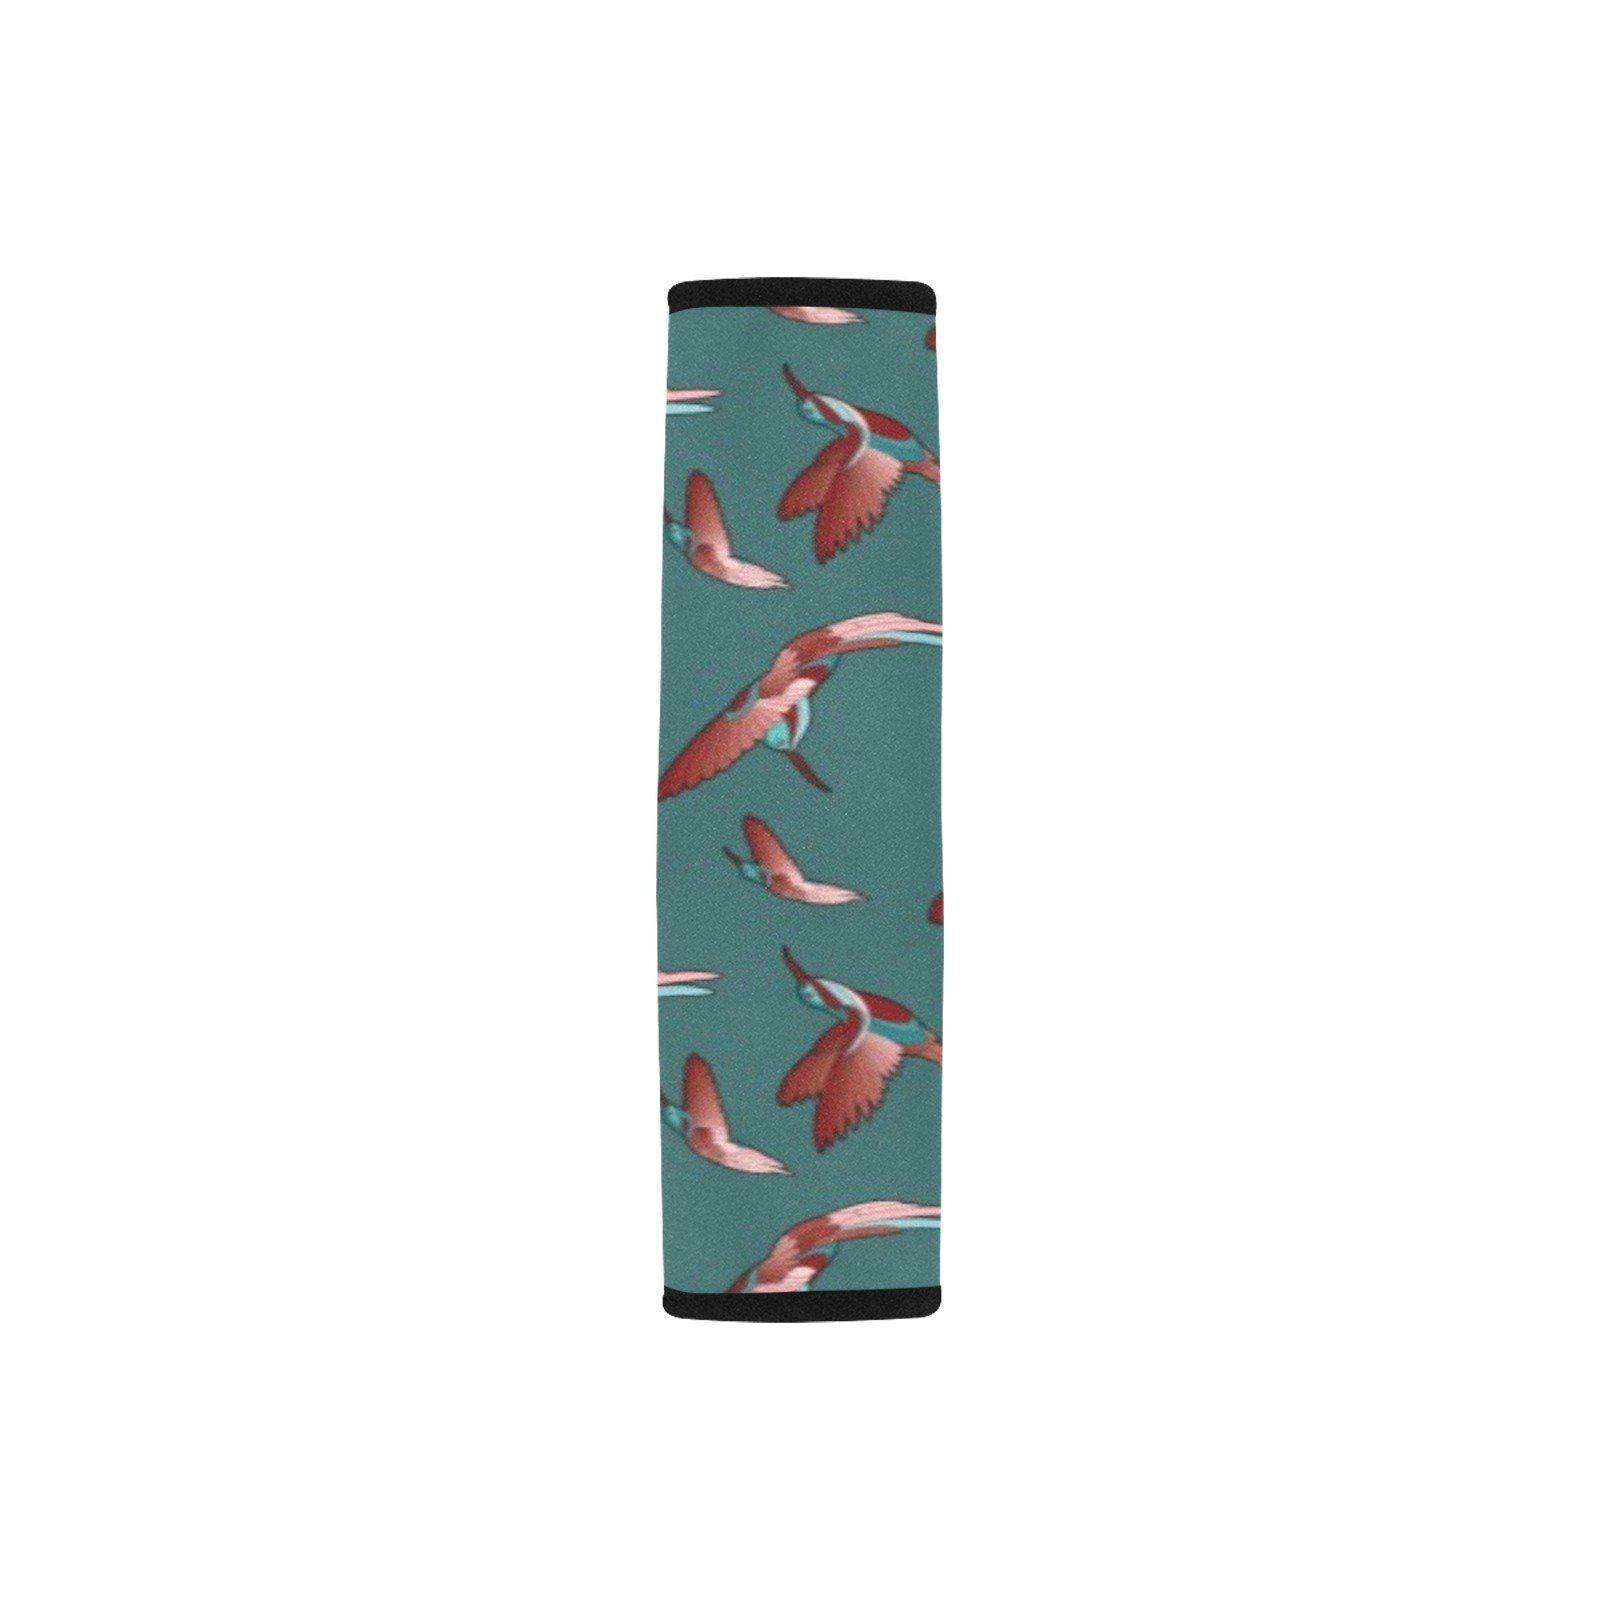 Red Swift Turquoise Car Seat Belt Cover 7''x12.6'' (Pack of 2) Car Seat Belt Cover 7x12.6 (Pack of 2) e-joyer 